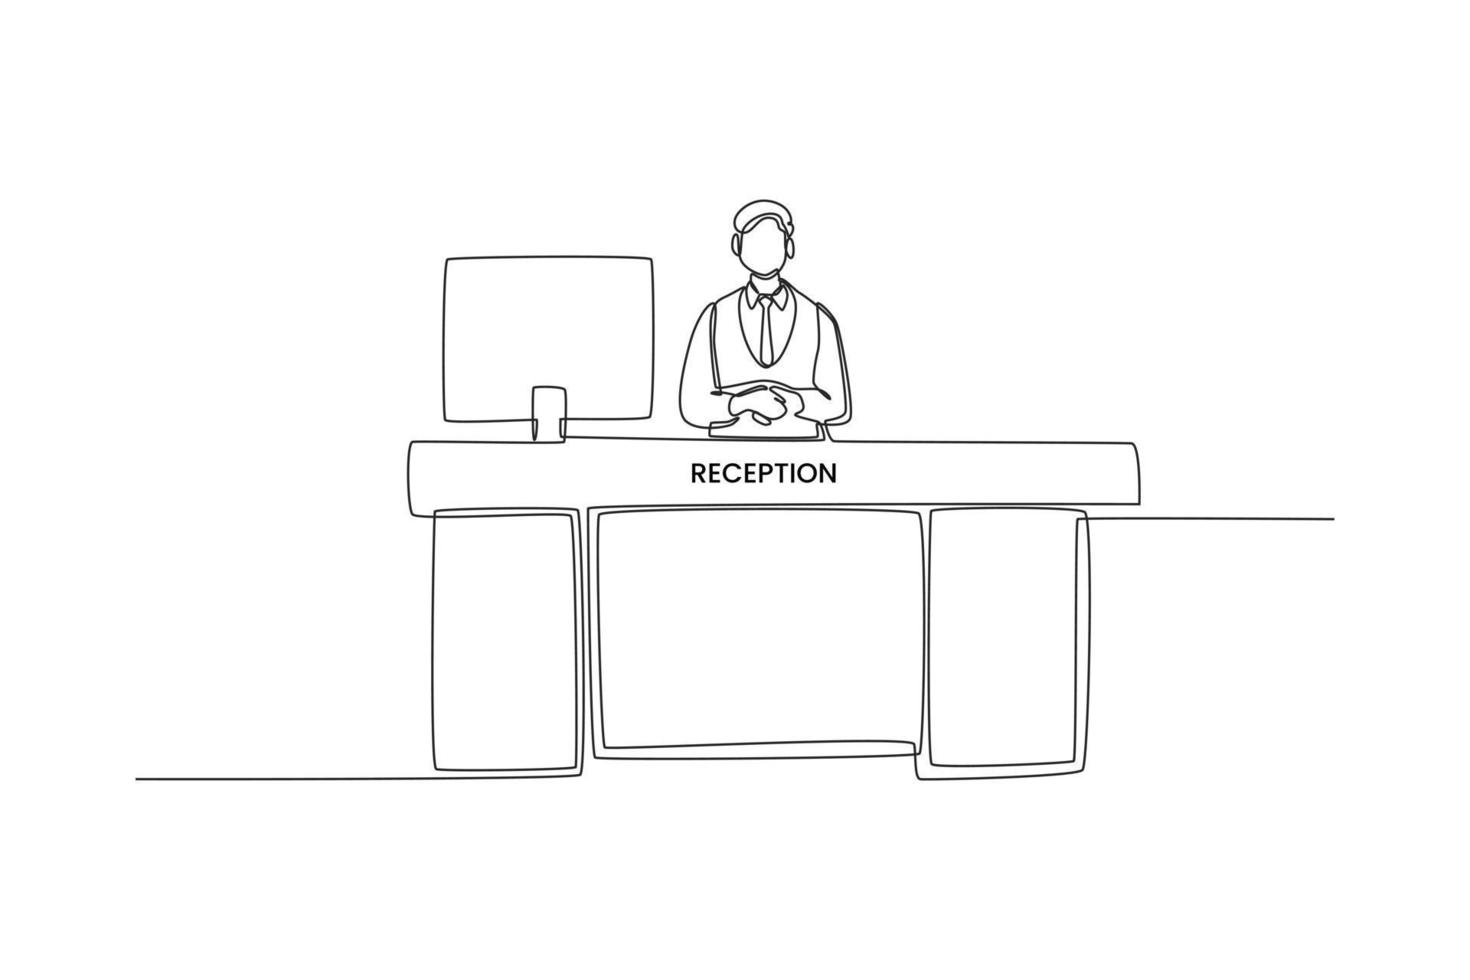 Single one line drawing manager behind registration desk. Receptionist and guests. Hotel activity concept. Continuous line draw design graphic vector illustration.